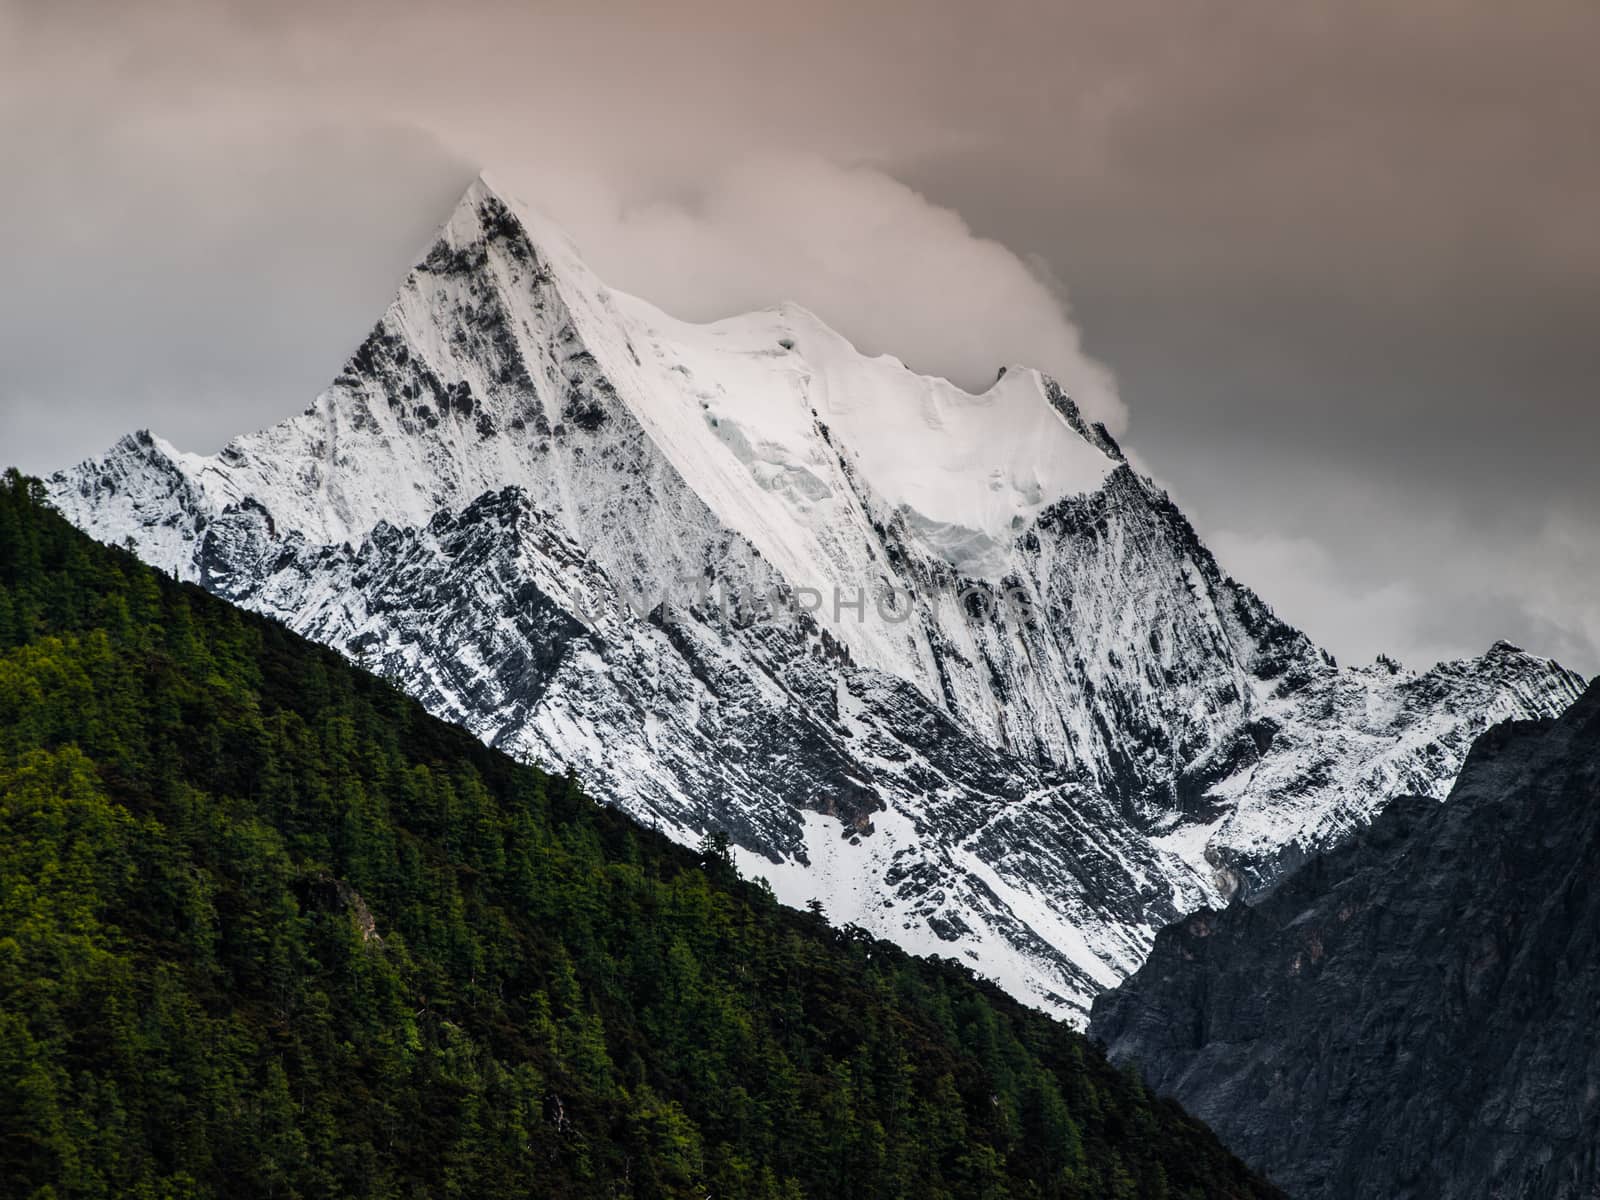 One of three holy mountains of Yading nature reserve (Sichuan, China)